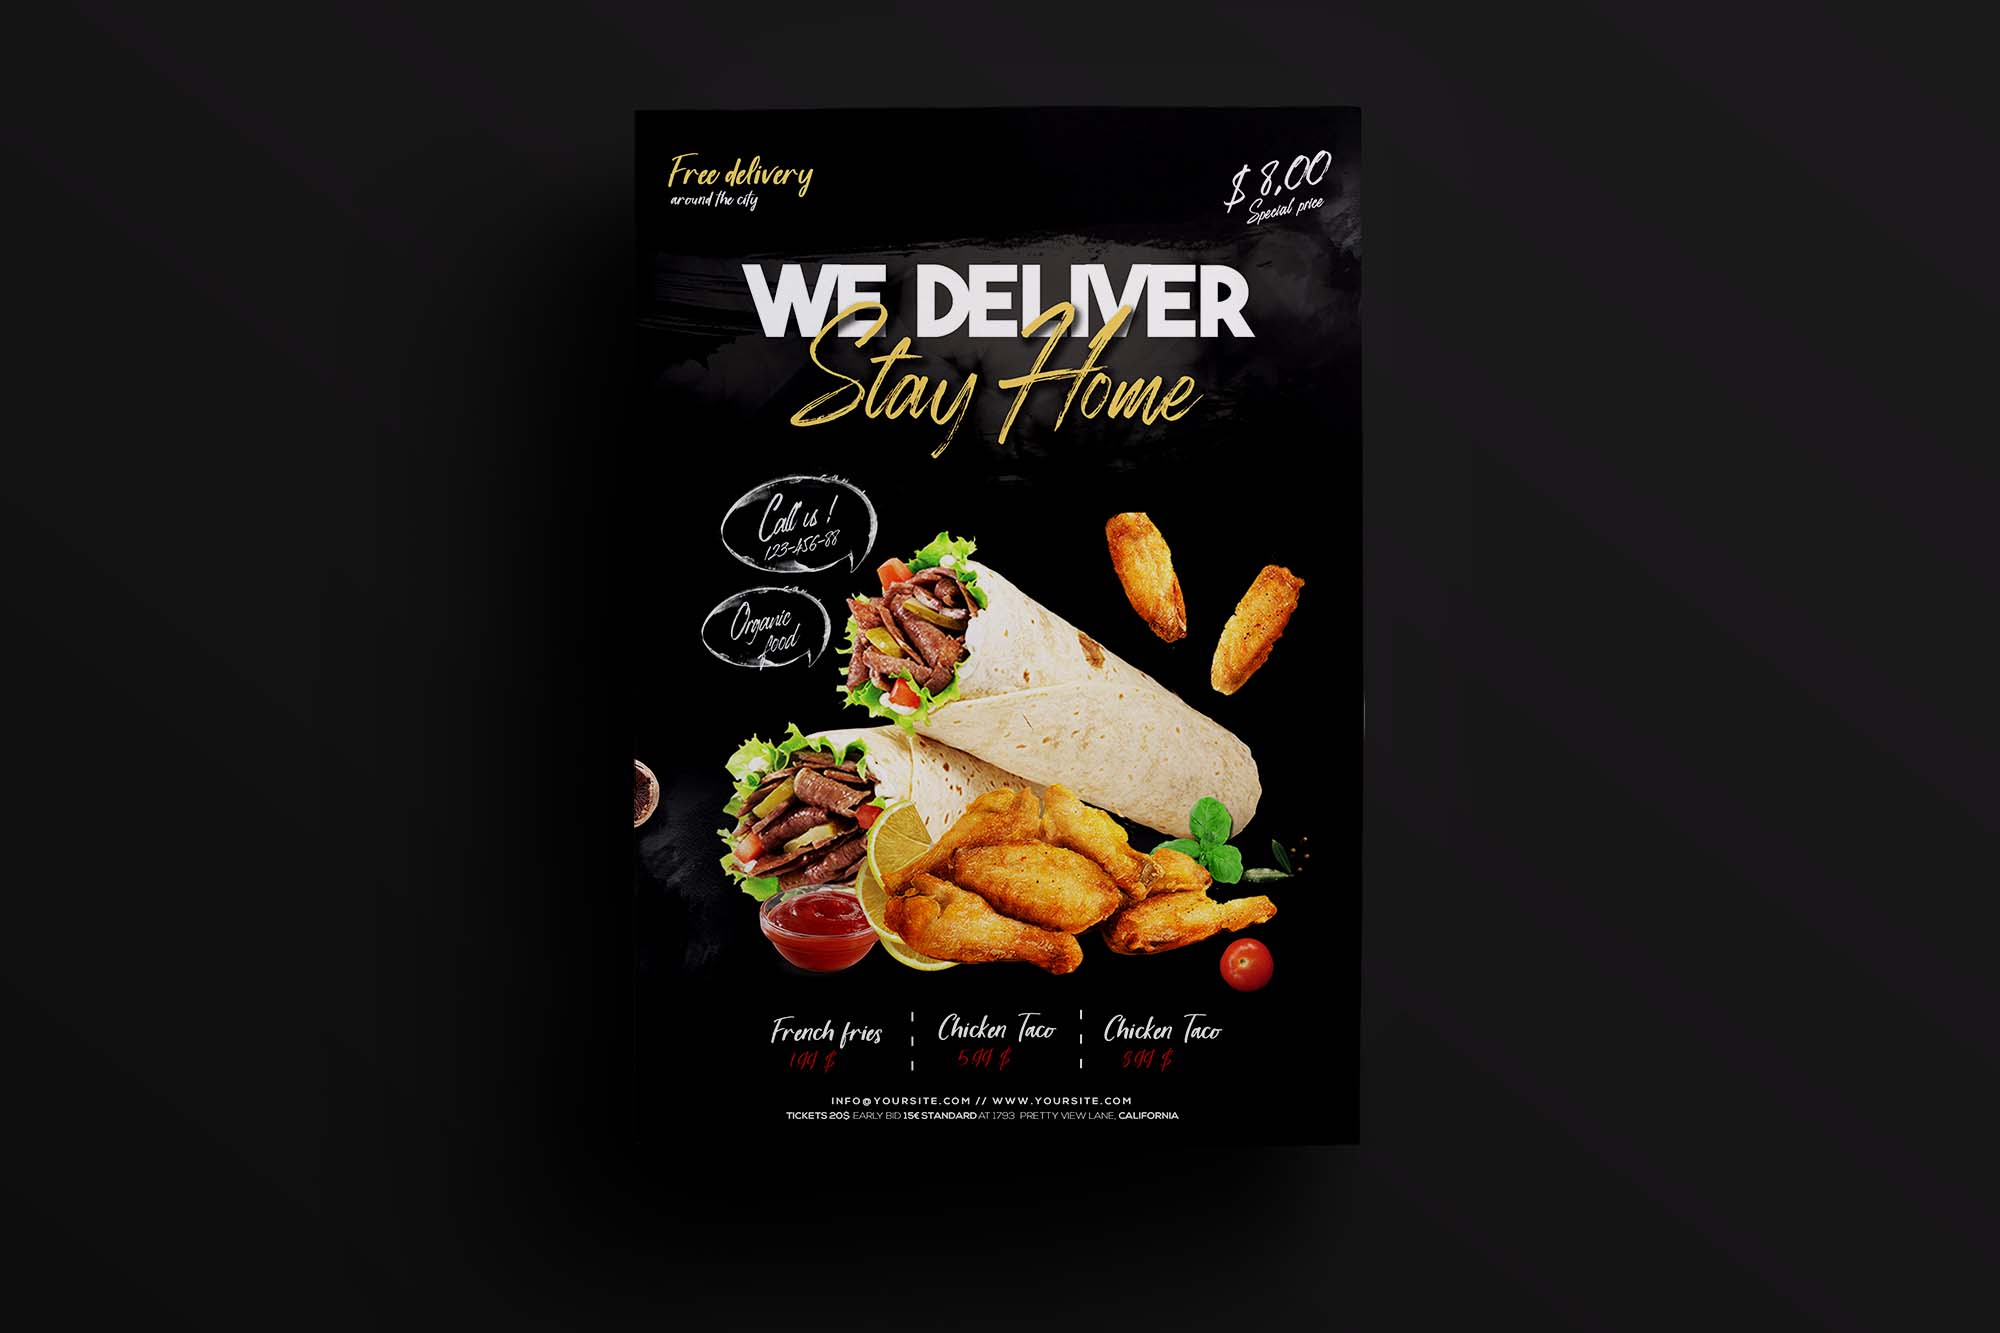 Free Home Delivery Food Flyer Template (PSD) Pertaining To Food Delivery Flyer Template Within Food Delivery Flyer Template